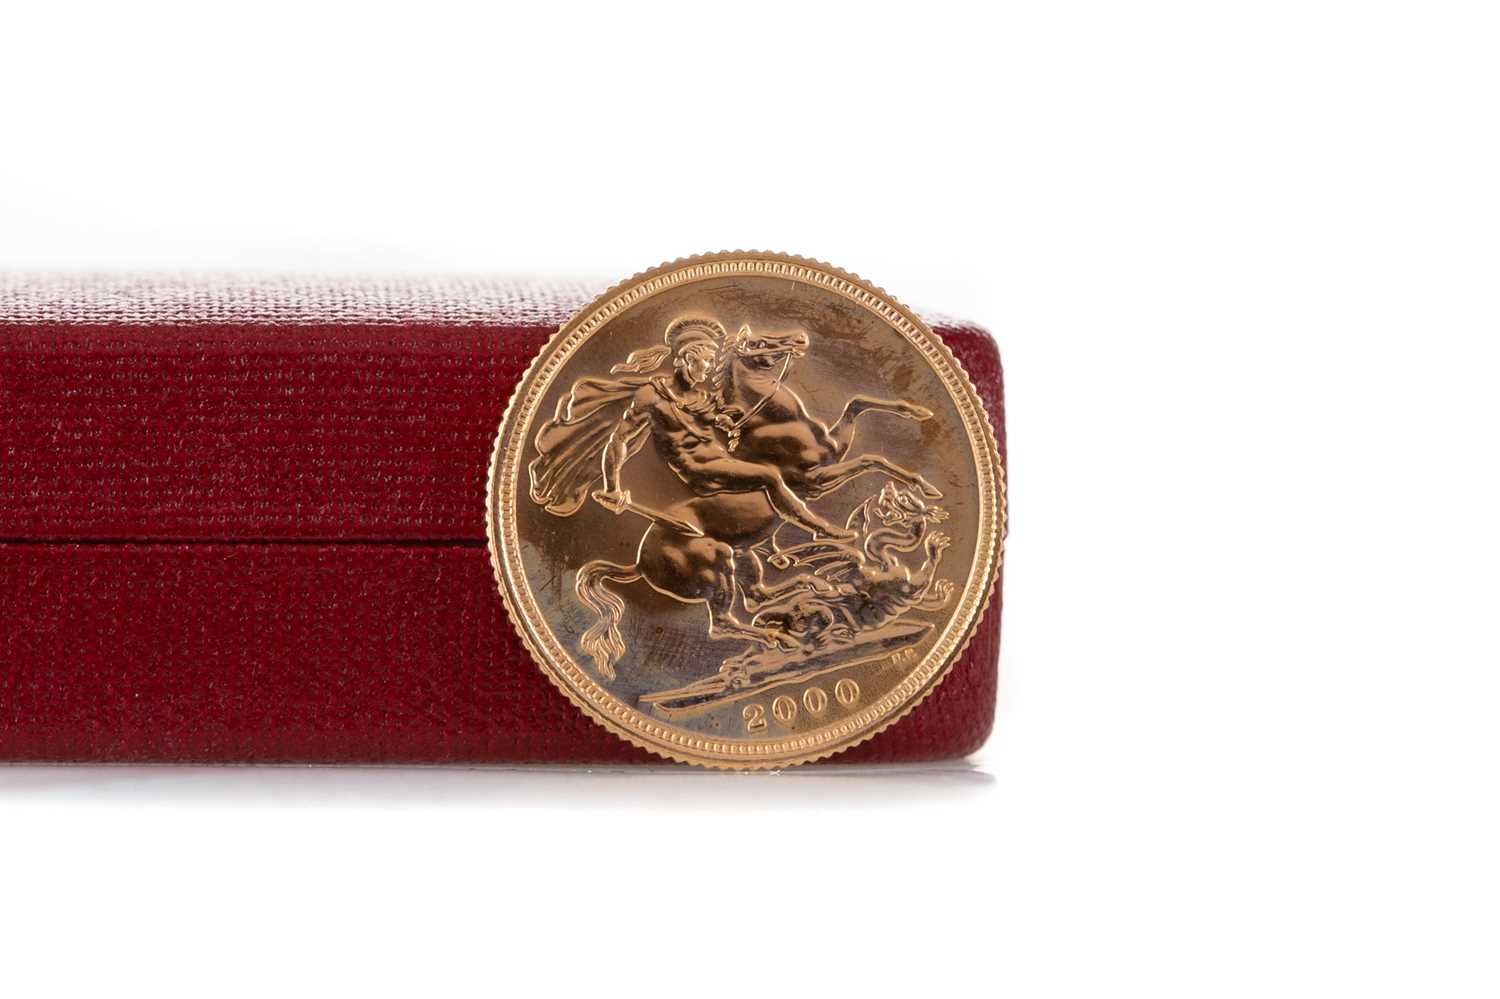 Lot 70 - AN ELIZABETH II GOLD SOVEREIGN DATED 2000